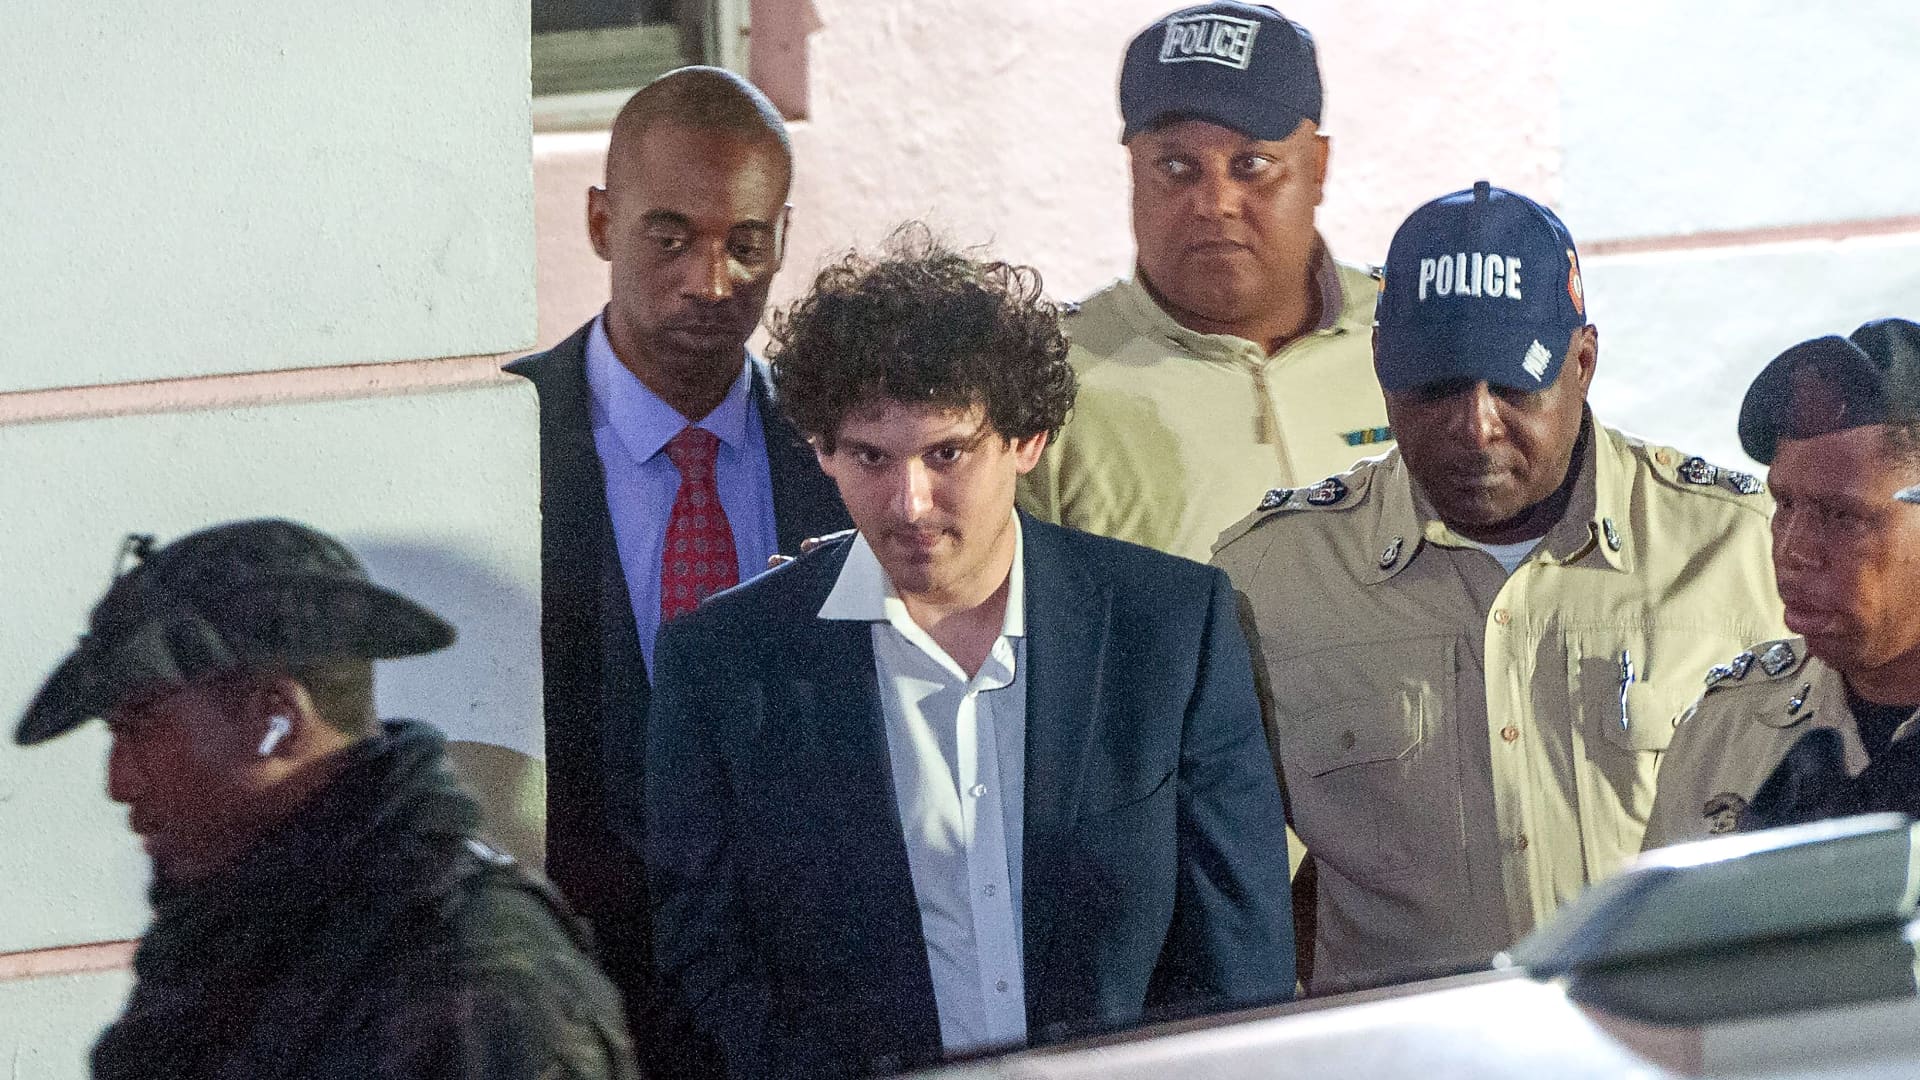 Photos show disgraced FTX founder Sam Bankman-Fried cuffed in Bahamas on his way to jail